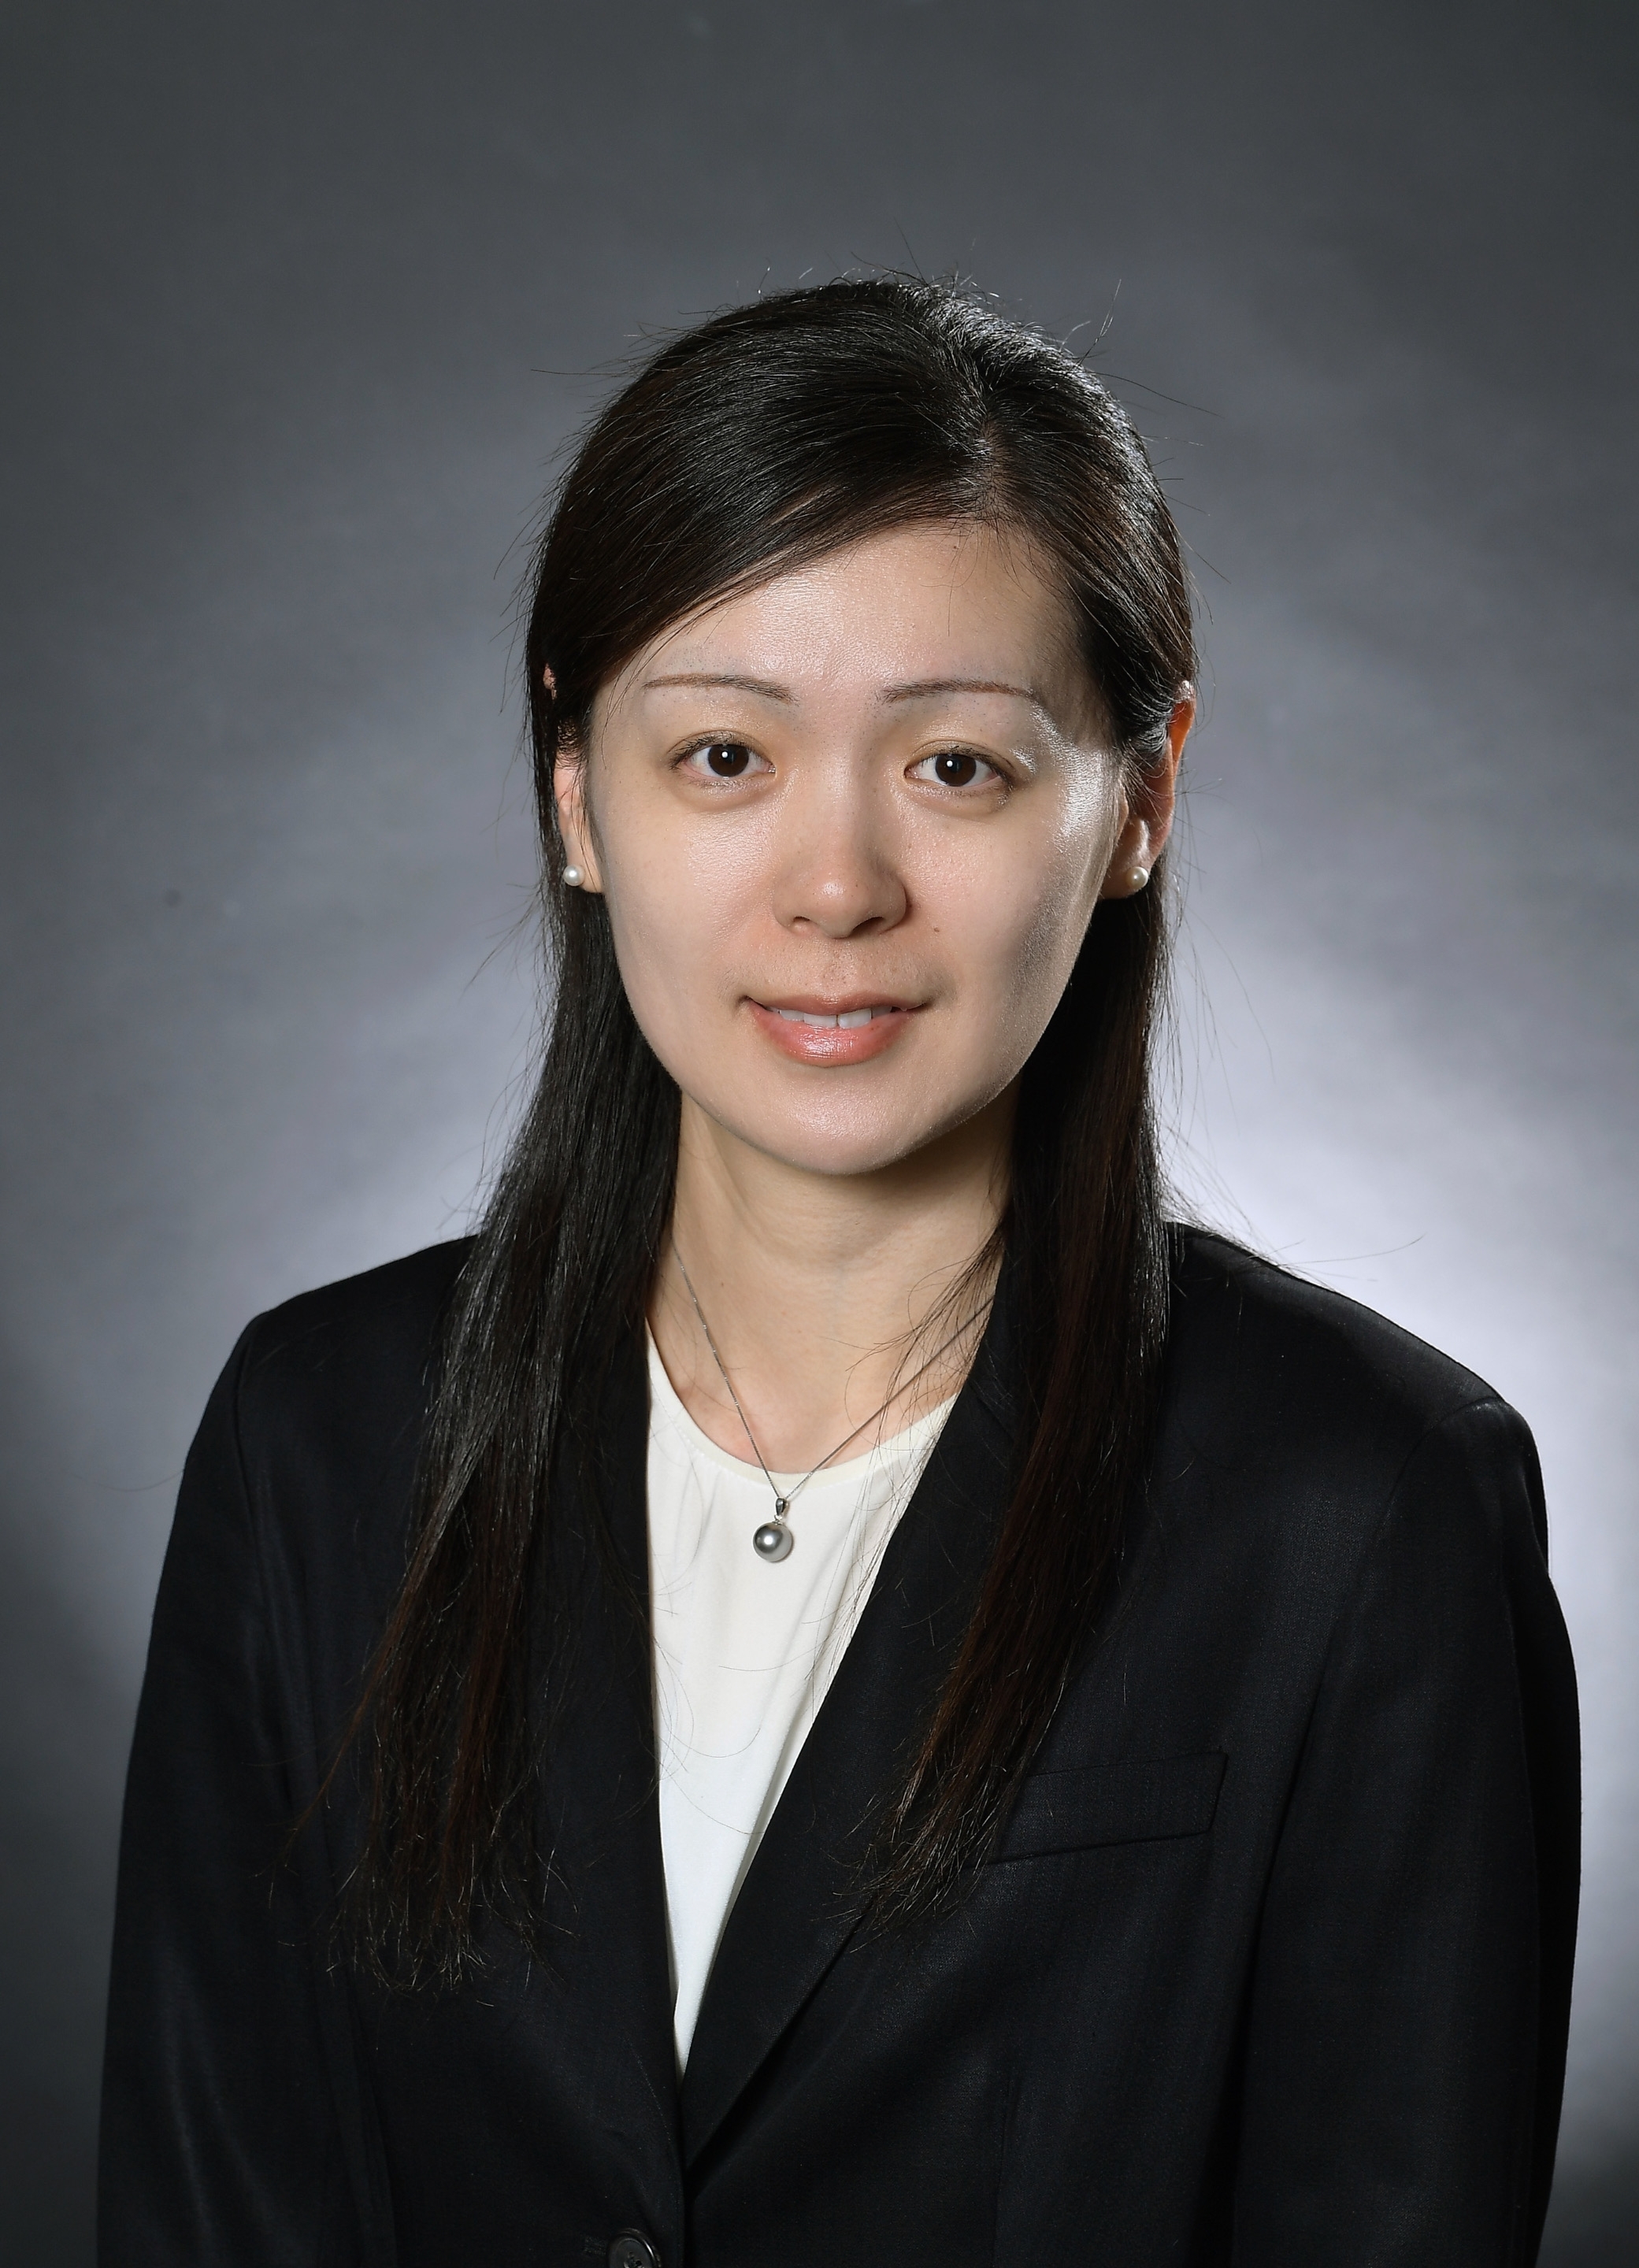 Profile photo for Yanni Ping, Ph.D.